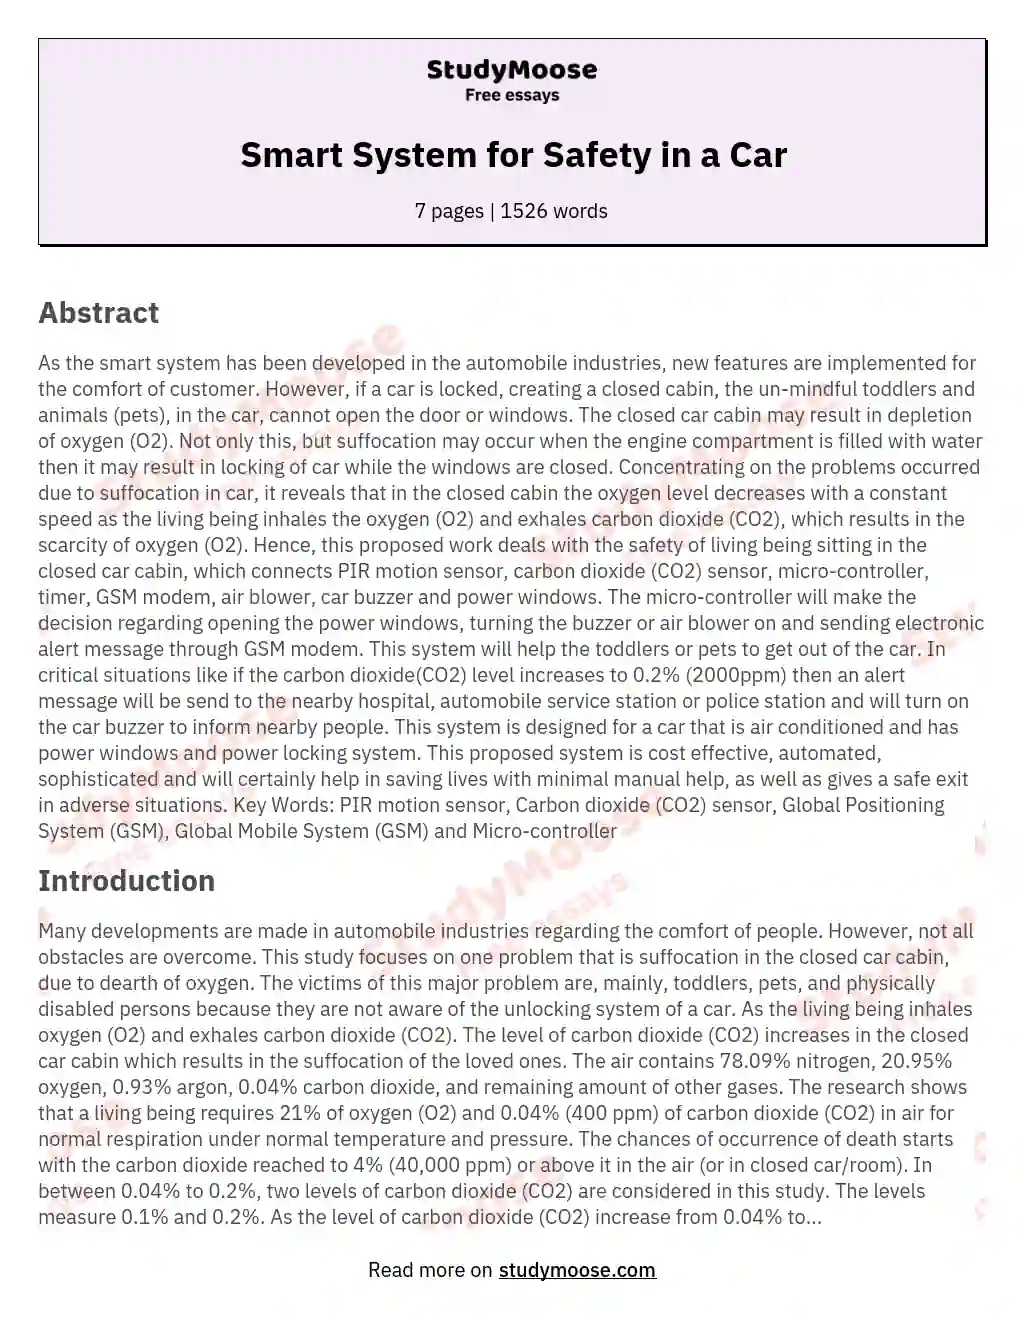 Smart System for Safety in a Car